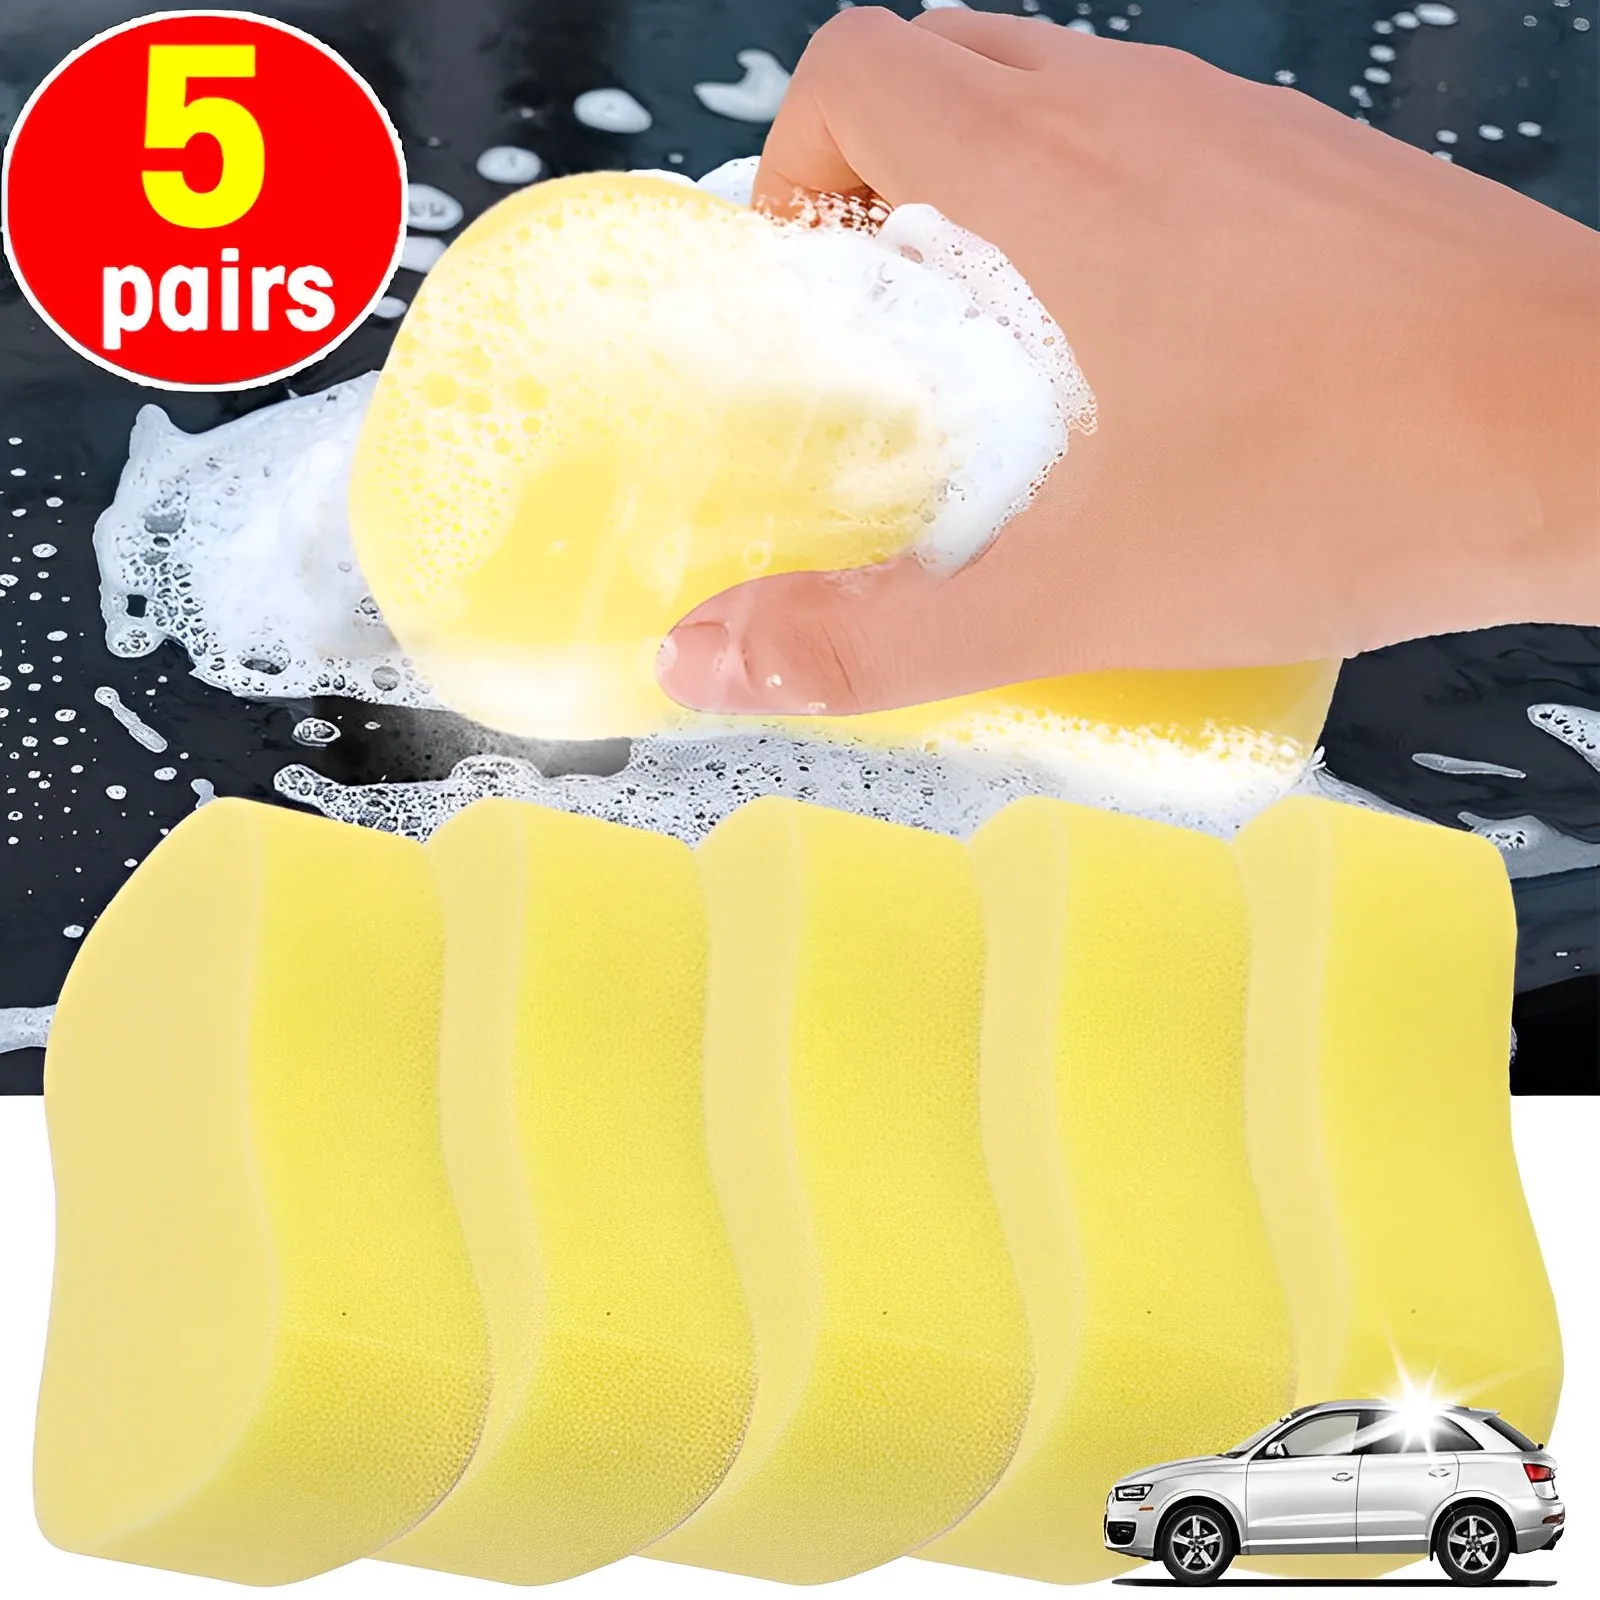 1-5pcs Car Washing Sponges Large Honeycomb 8-shaped High-density Sponges Block Car Cleaning Waxing Tools Cleaning Accessories